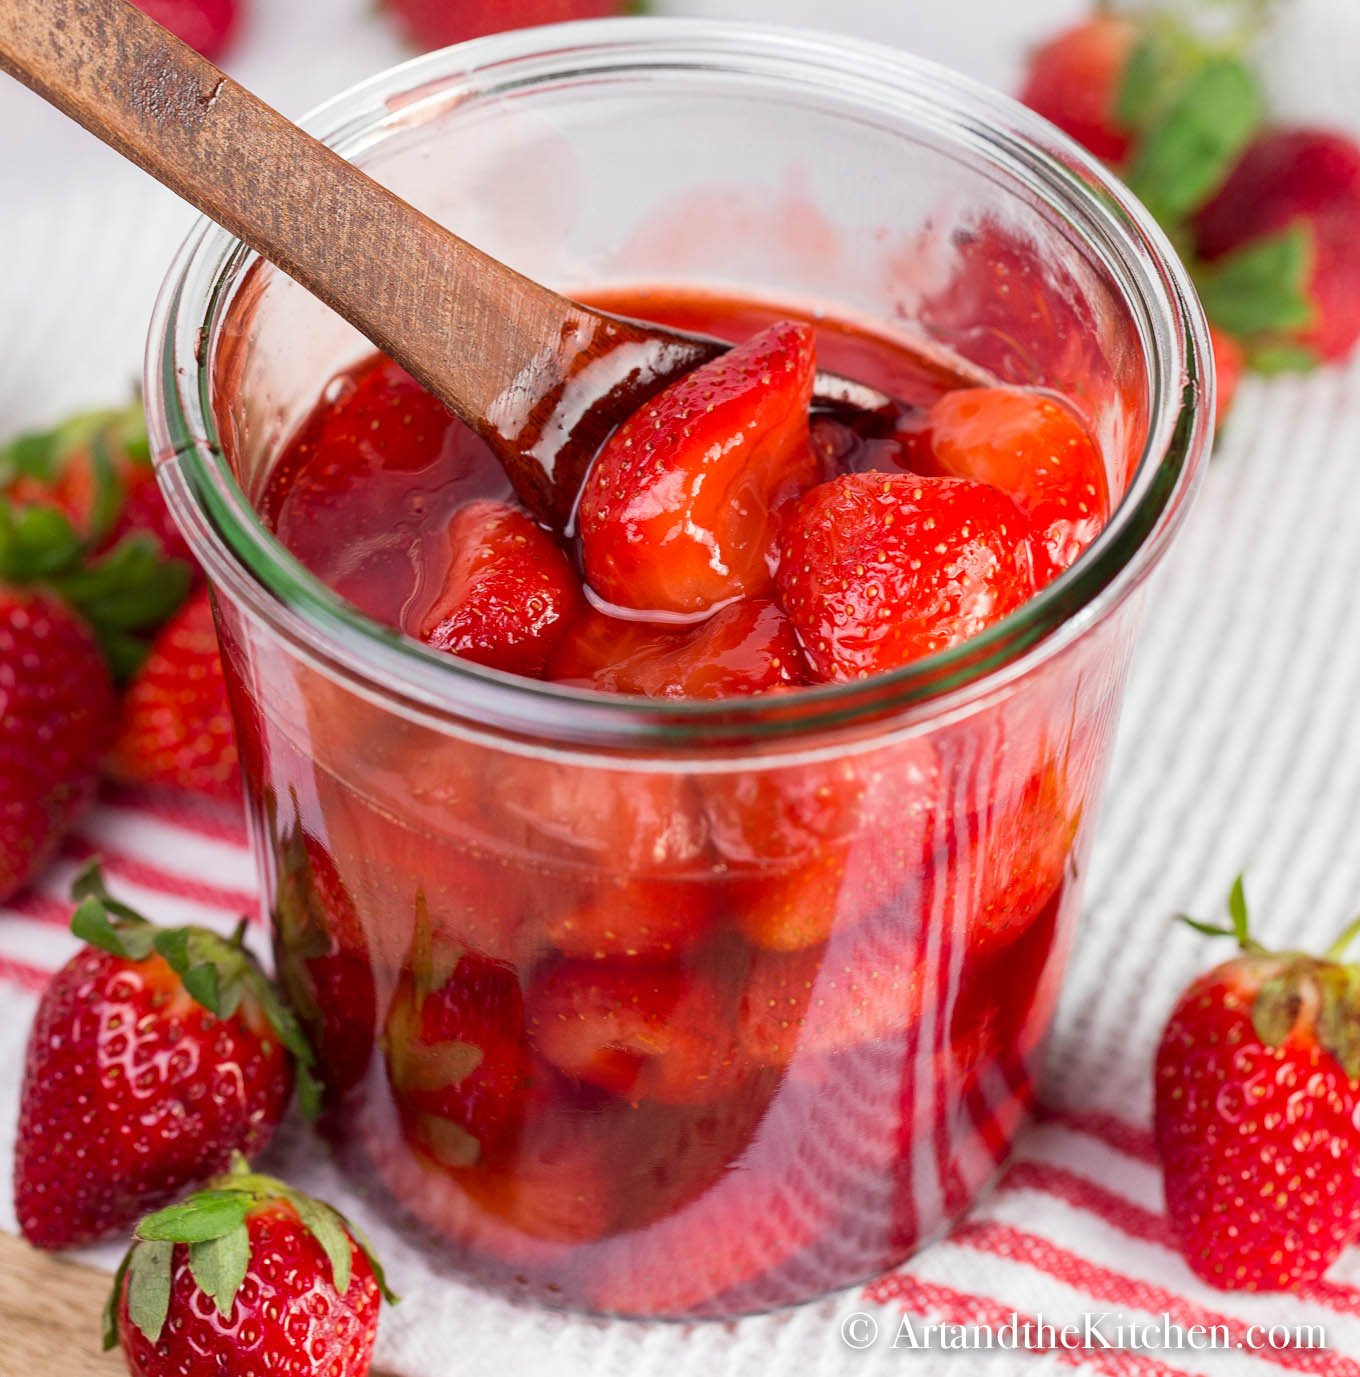 strawberry sauce in glass jar with wooden spoon fresh strawberries in background